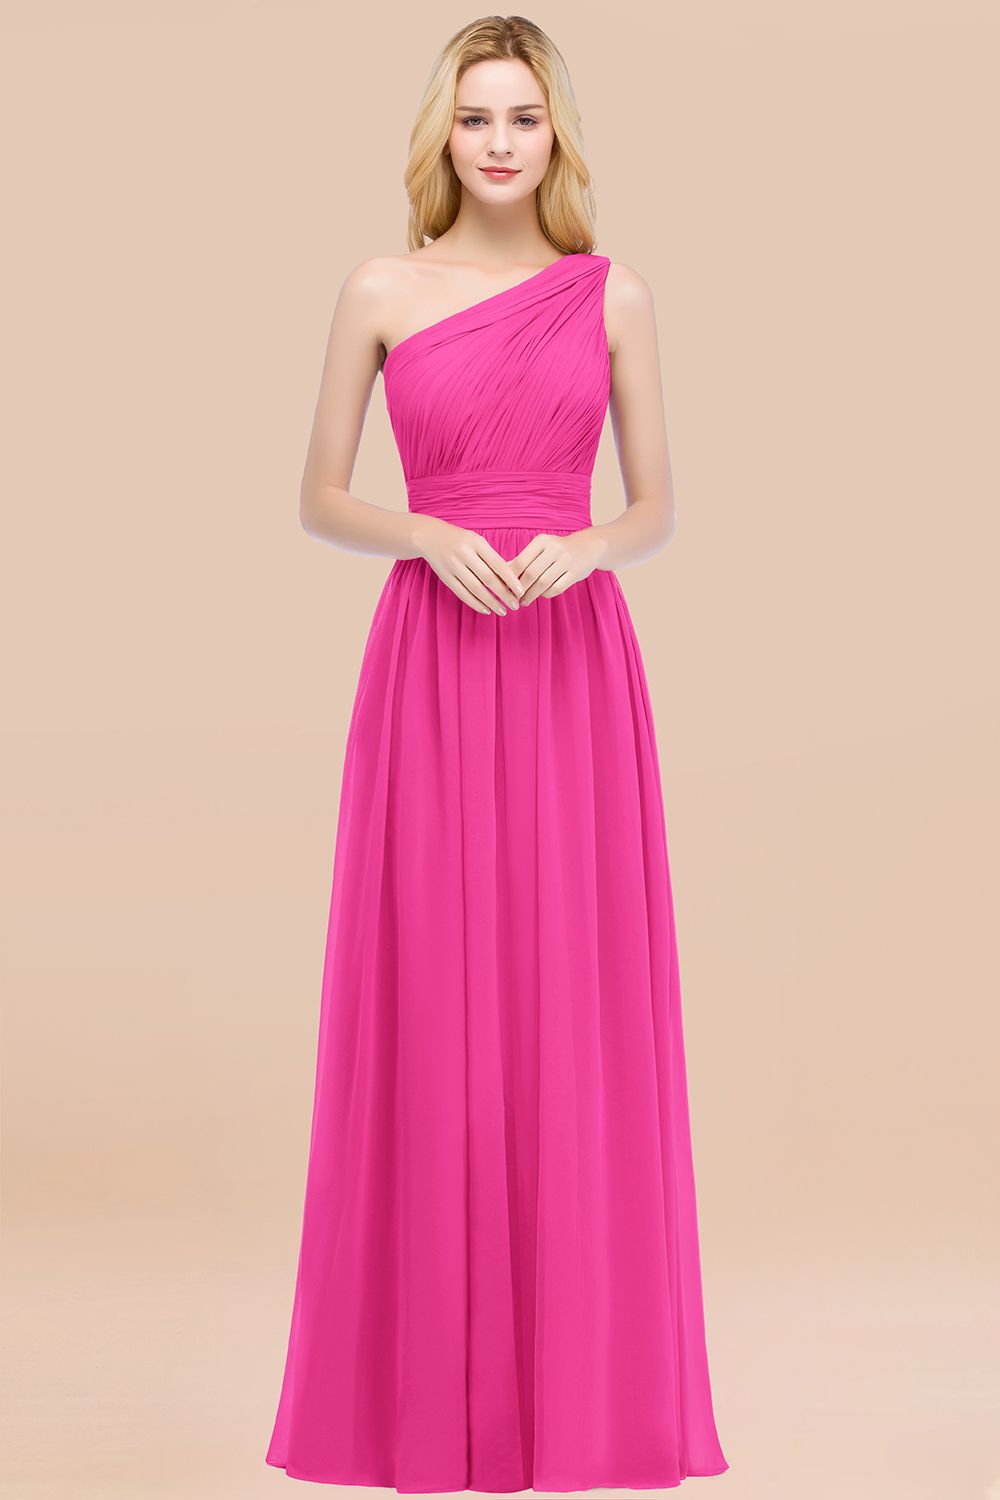 Load image into Gallery viewer, Chic One-shoulder Sleeveless Burgundy Chiffon Bridesmaid Dresses Online-27dress
